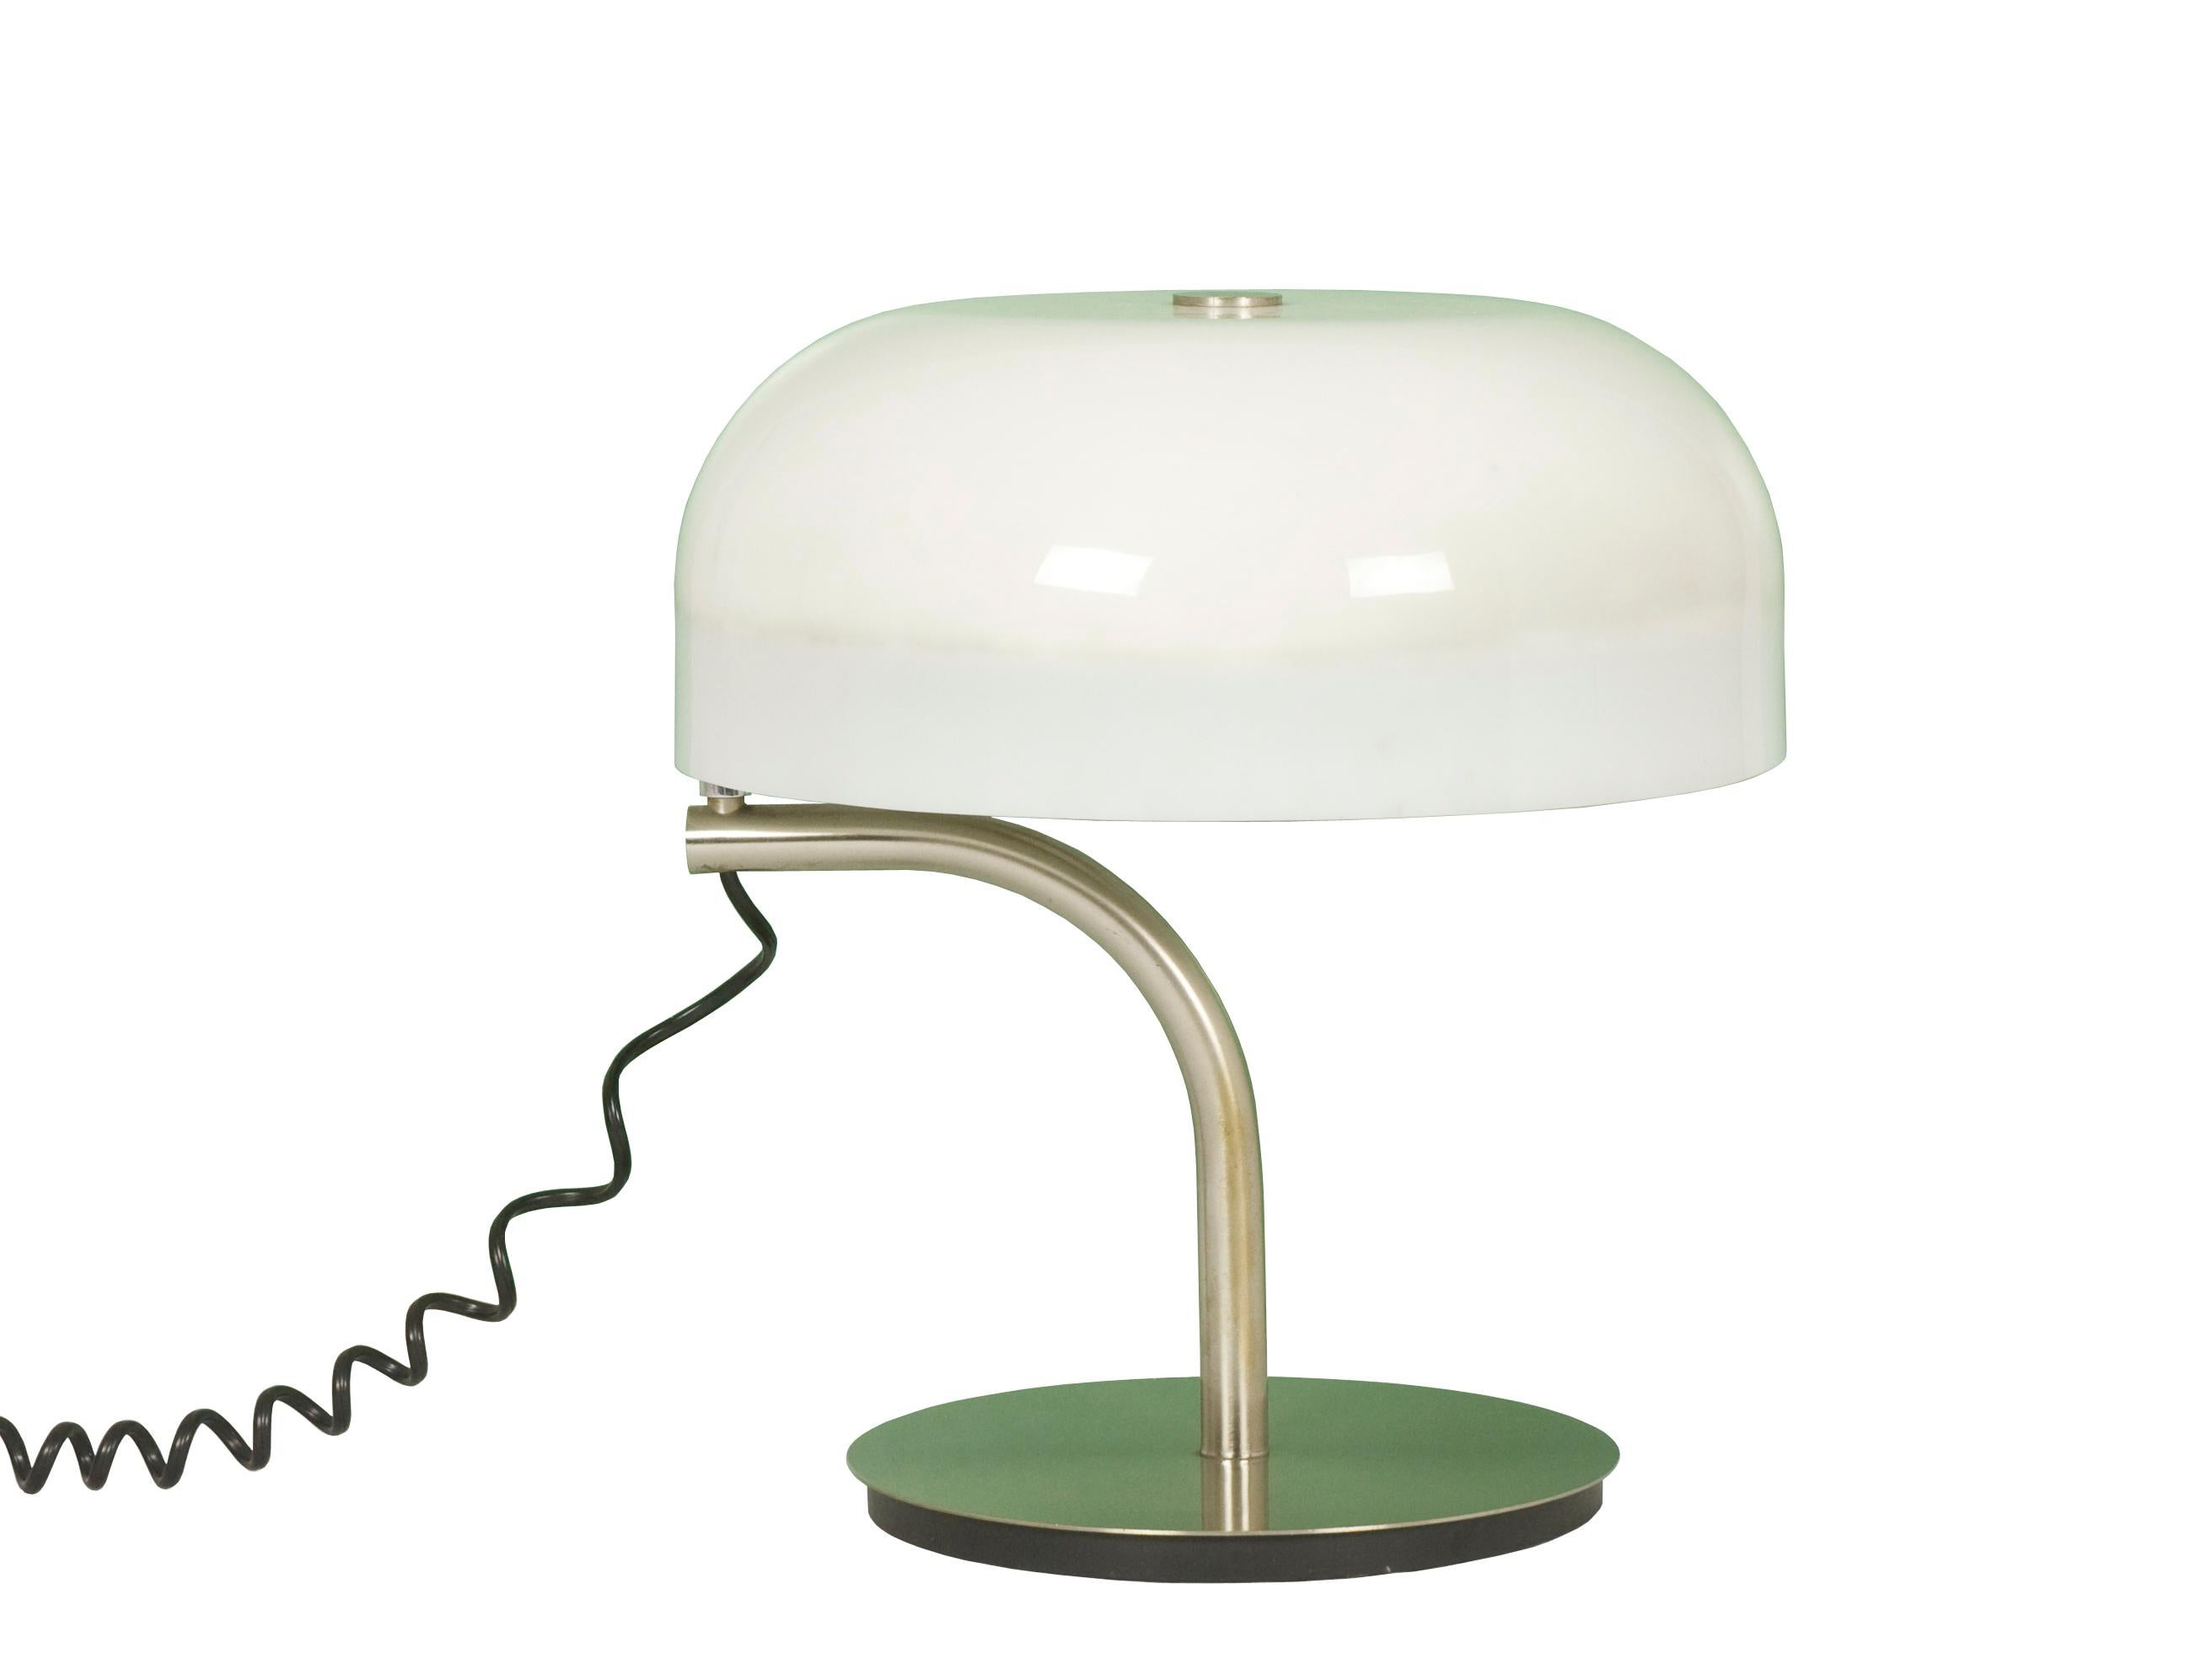 Painted Plastic & Nickel Table Lamp Professional by G. Scolari for Valenti, 1970 For Sale